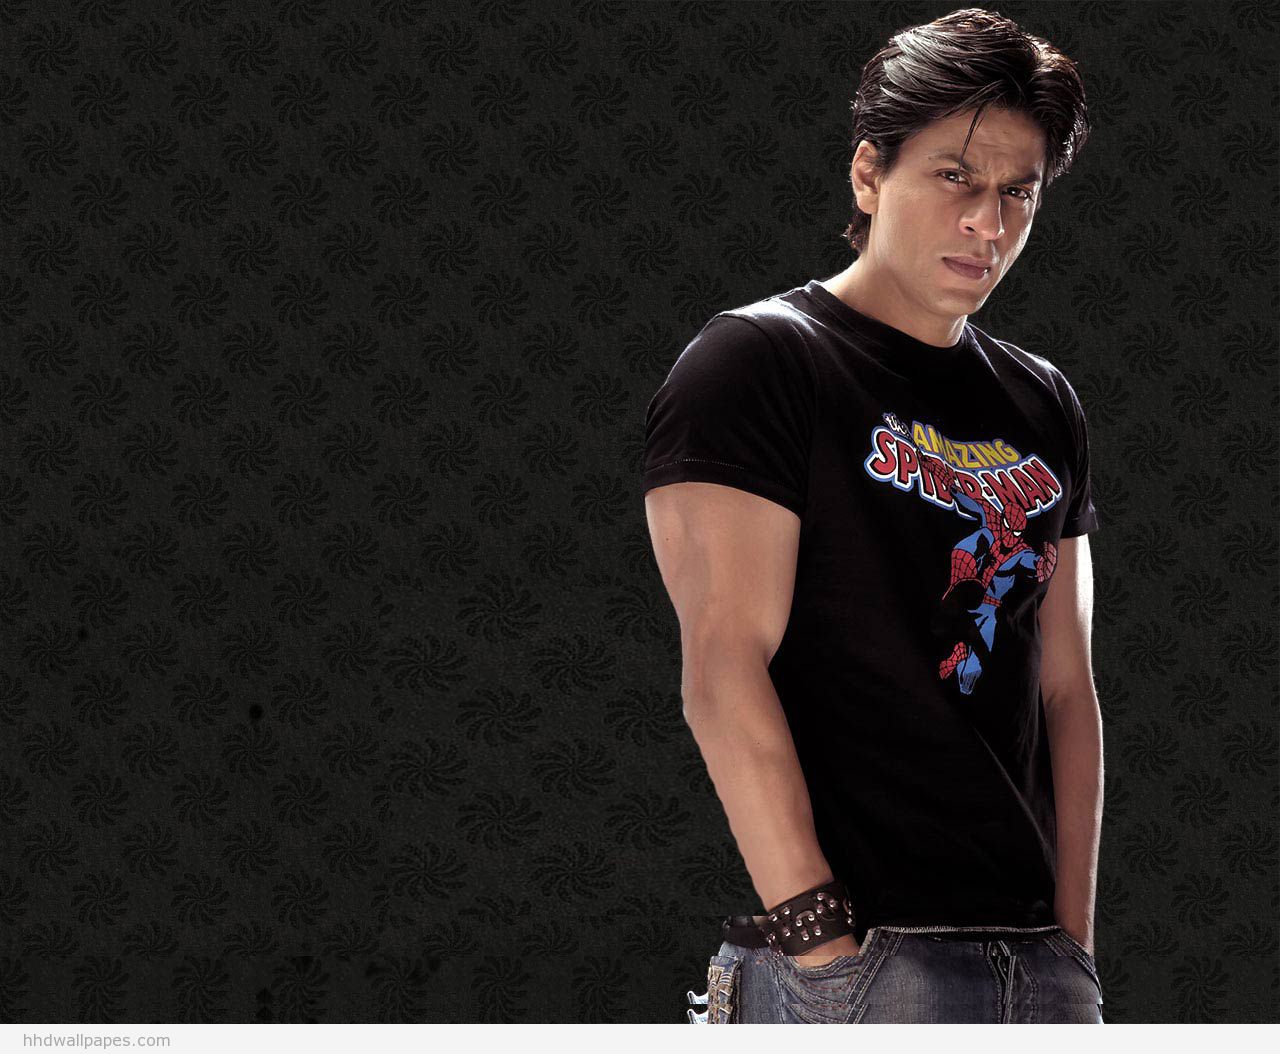 Shahrukh khan new look hd wallpapers Wallpapers Wide Free